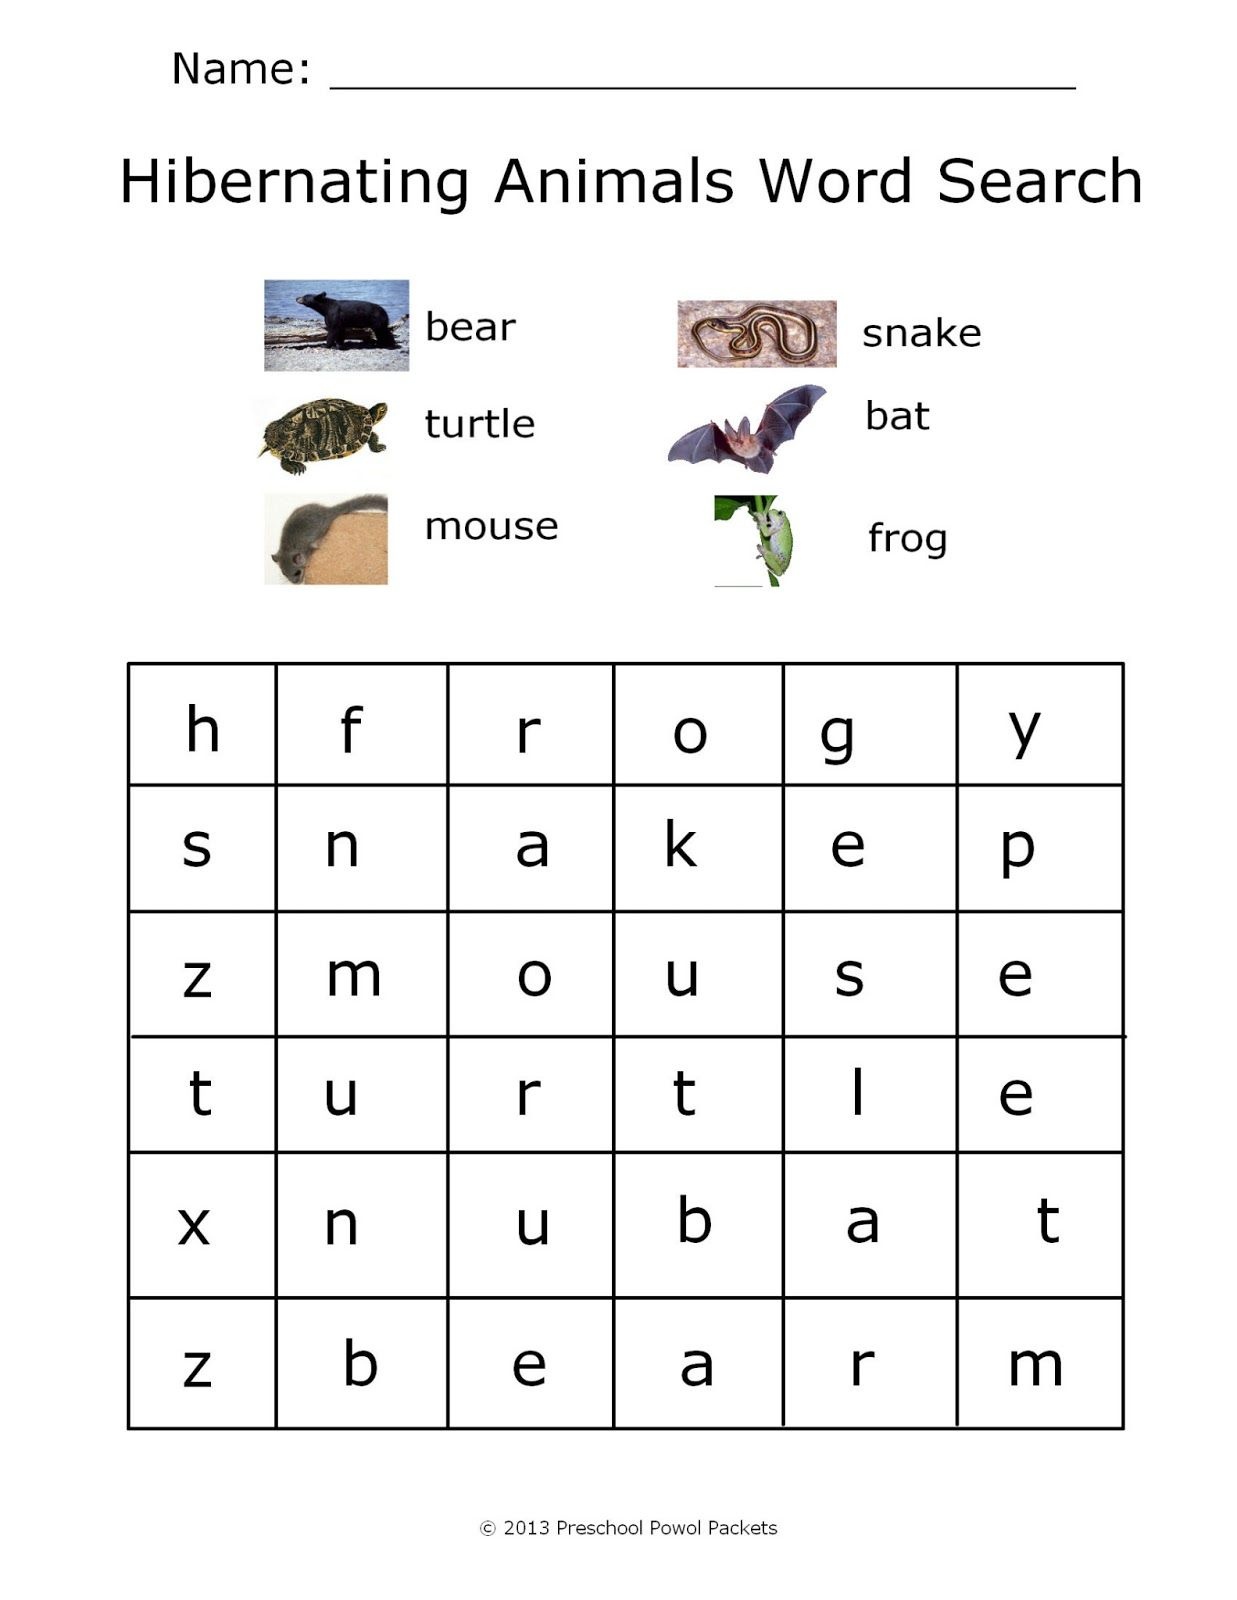 Animals wordsearch. Word search animals. Animal Wordsearch. Animals Wordsearch for Kindergarten. Animals Wordsearch for Kids.